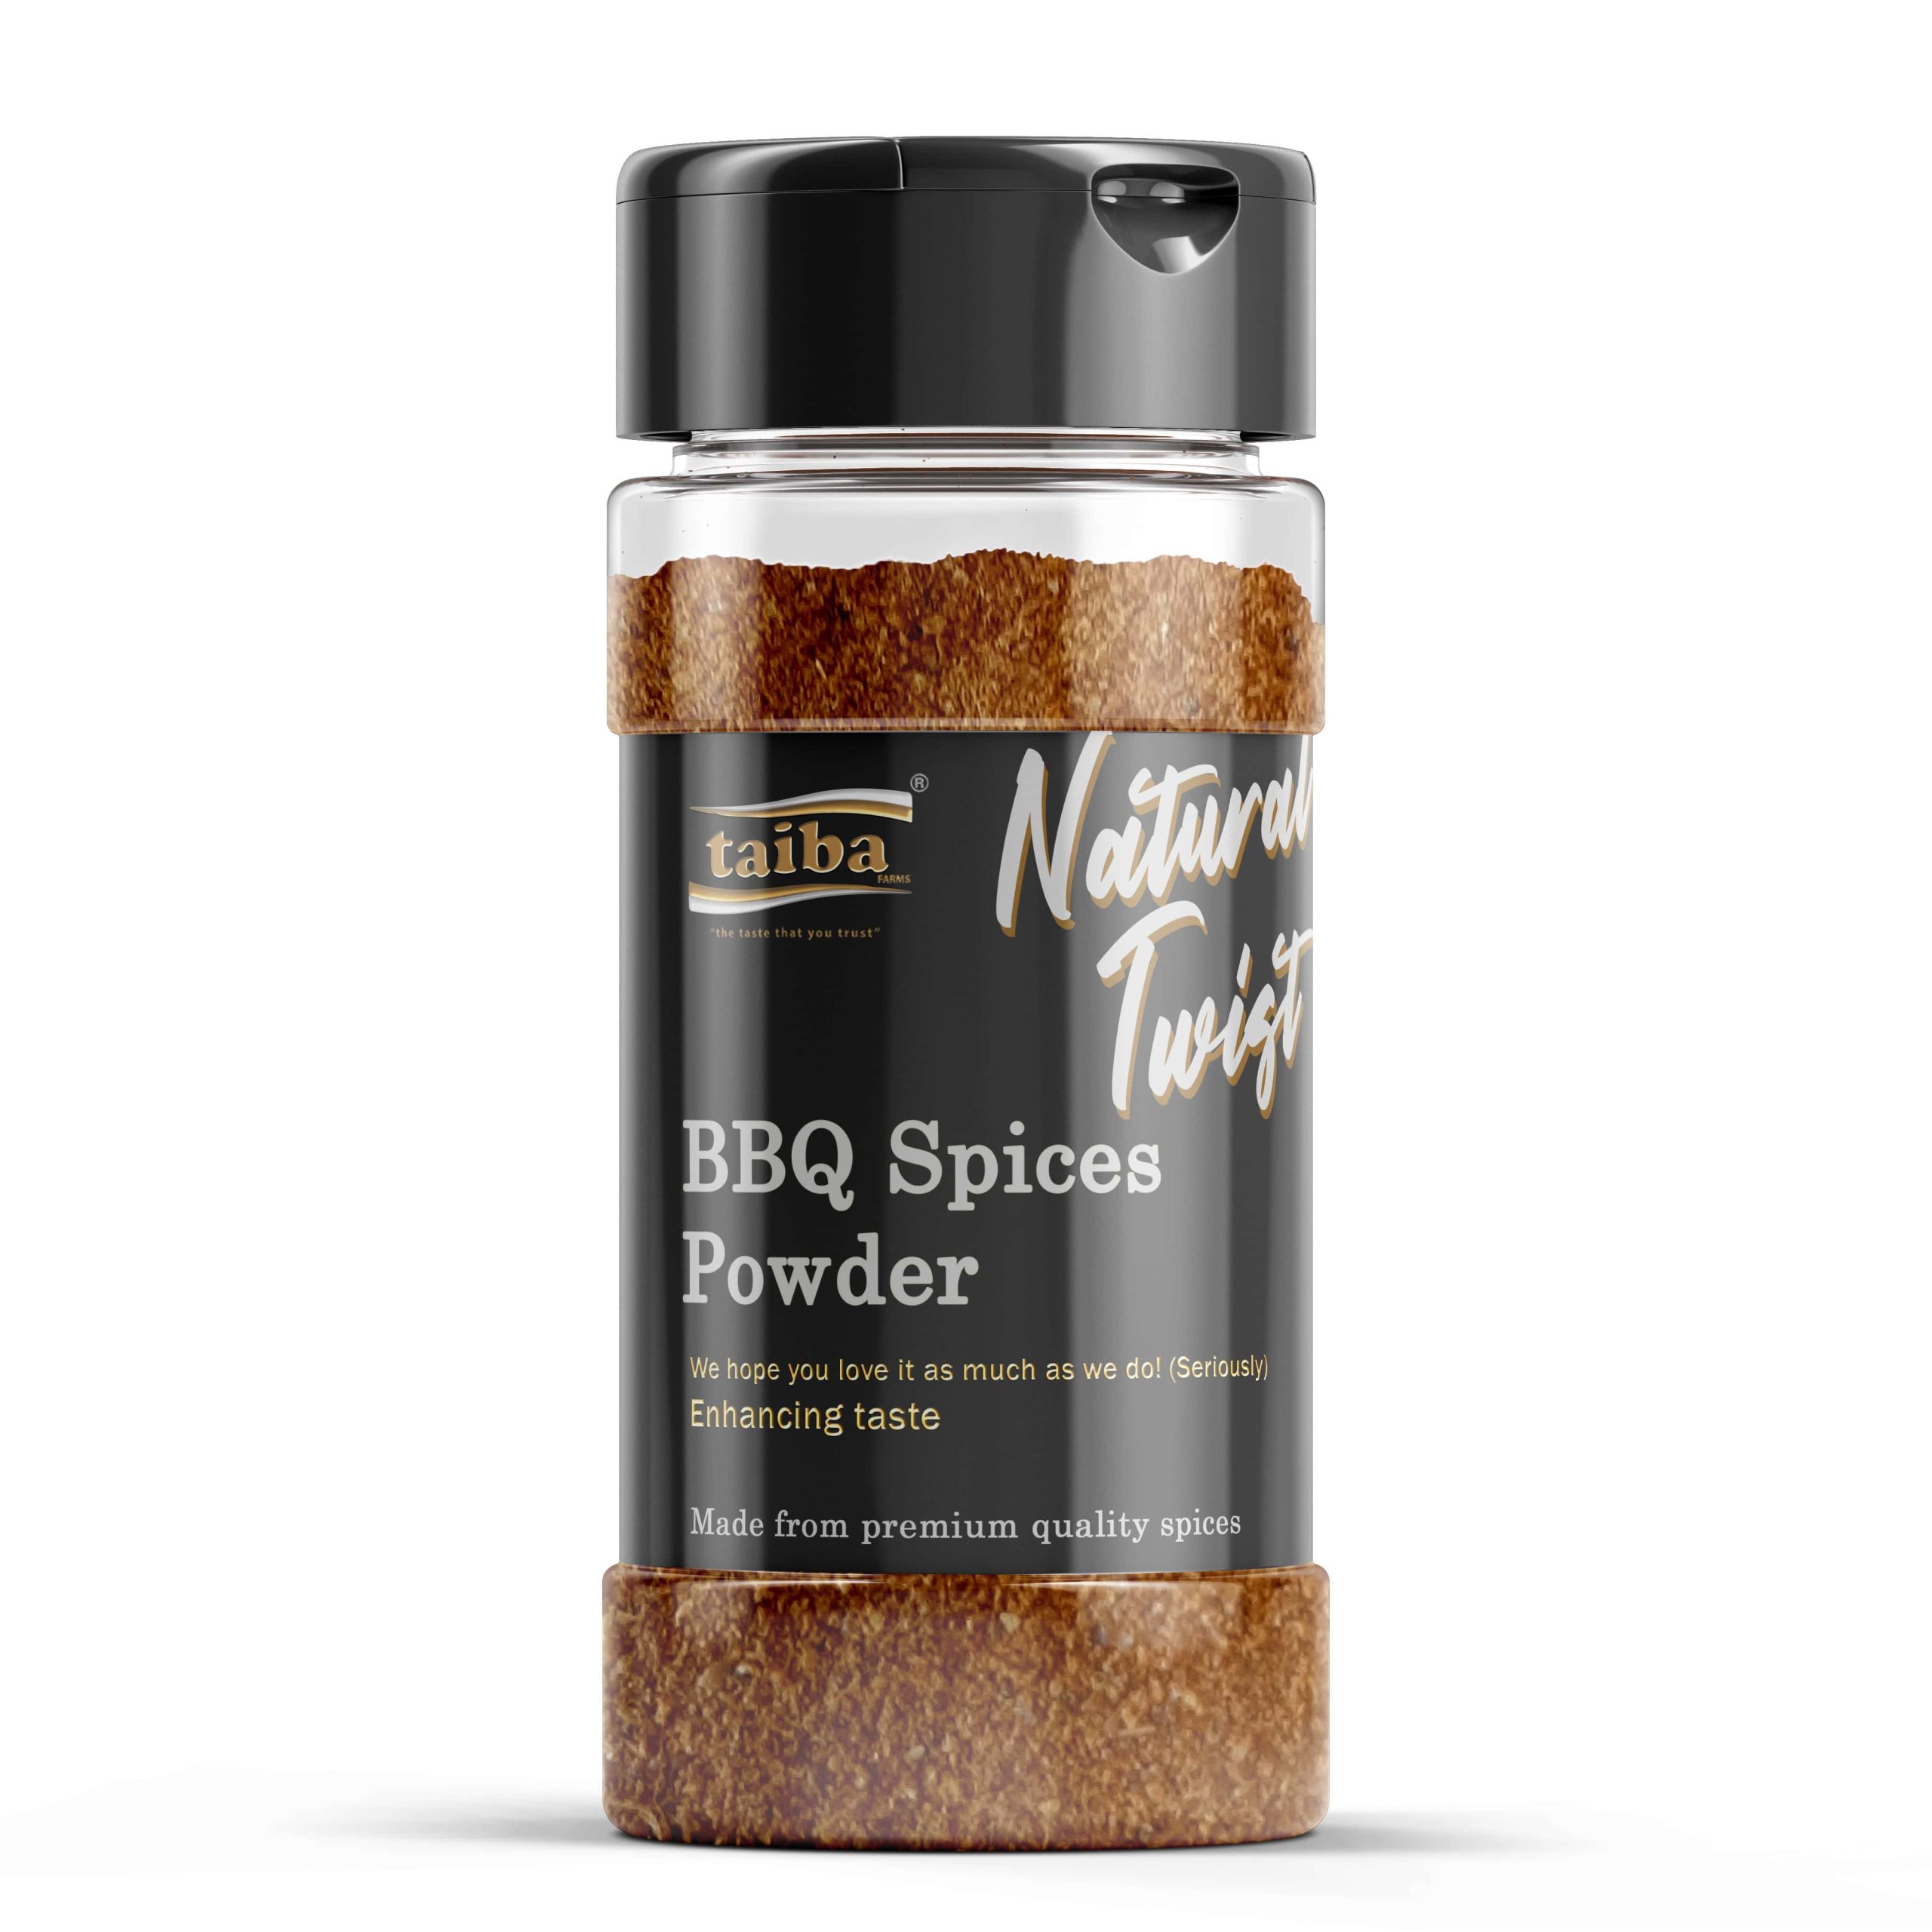 BBQ-Spices-shop-online-online-grocery-hearps-and-spices-online-suppliers-in-UAE-KSA-USA-UK